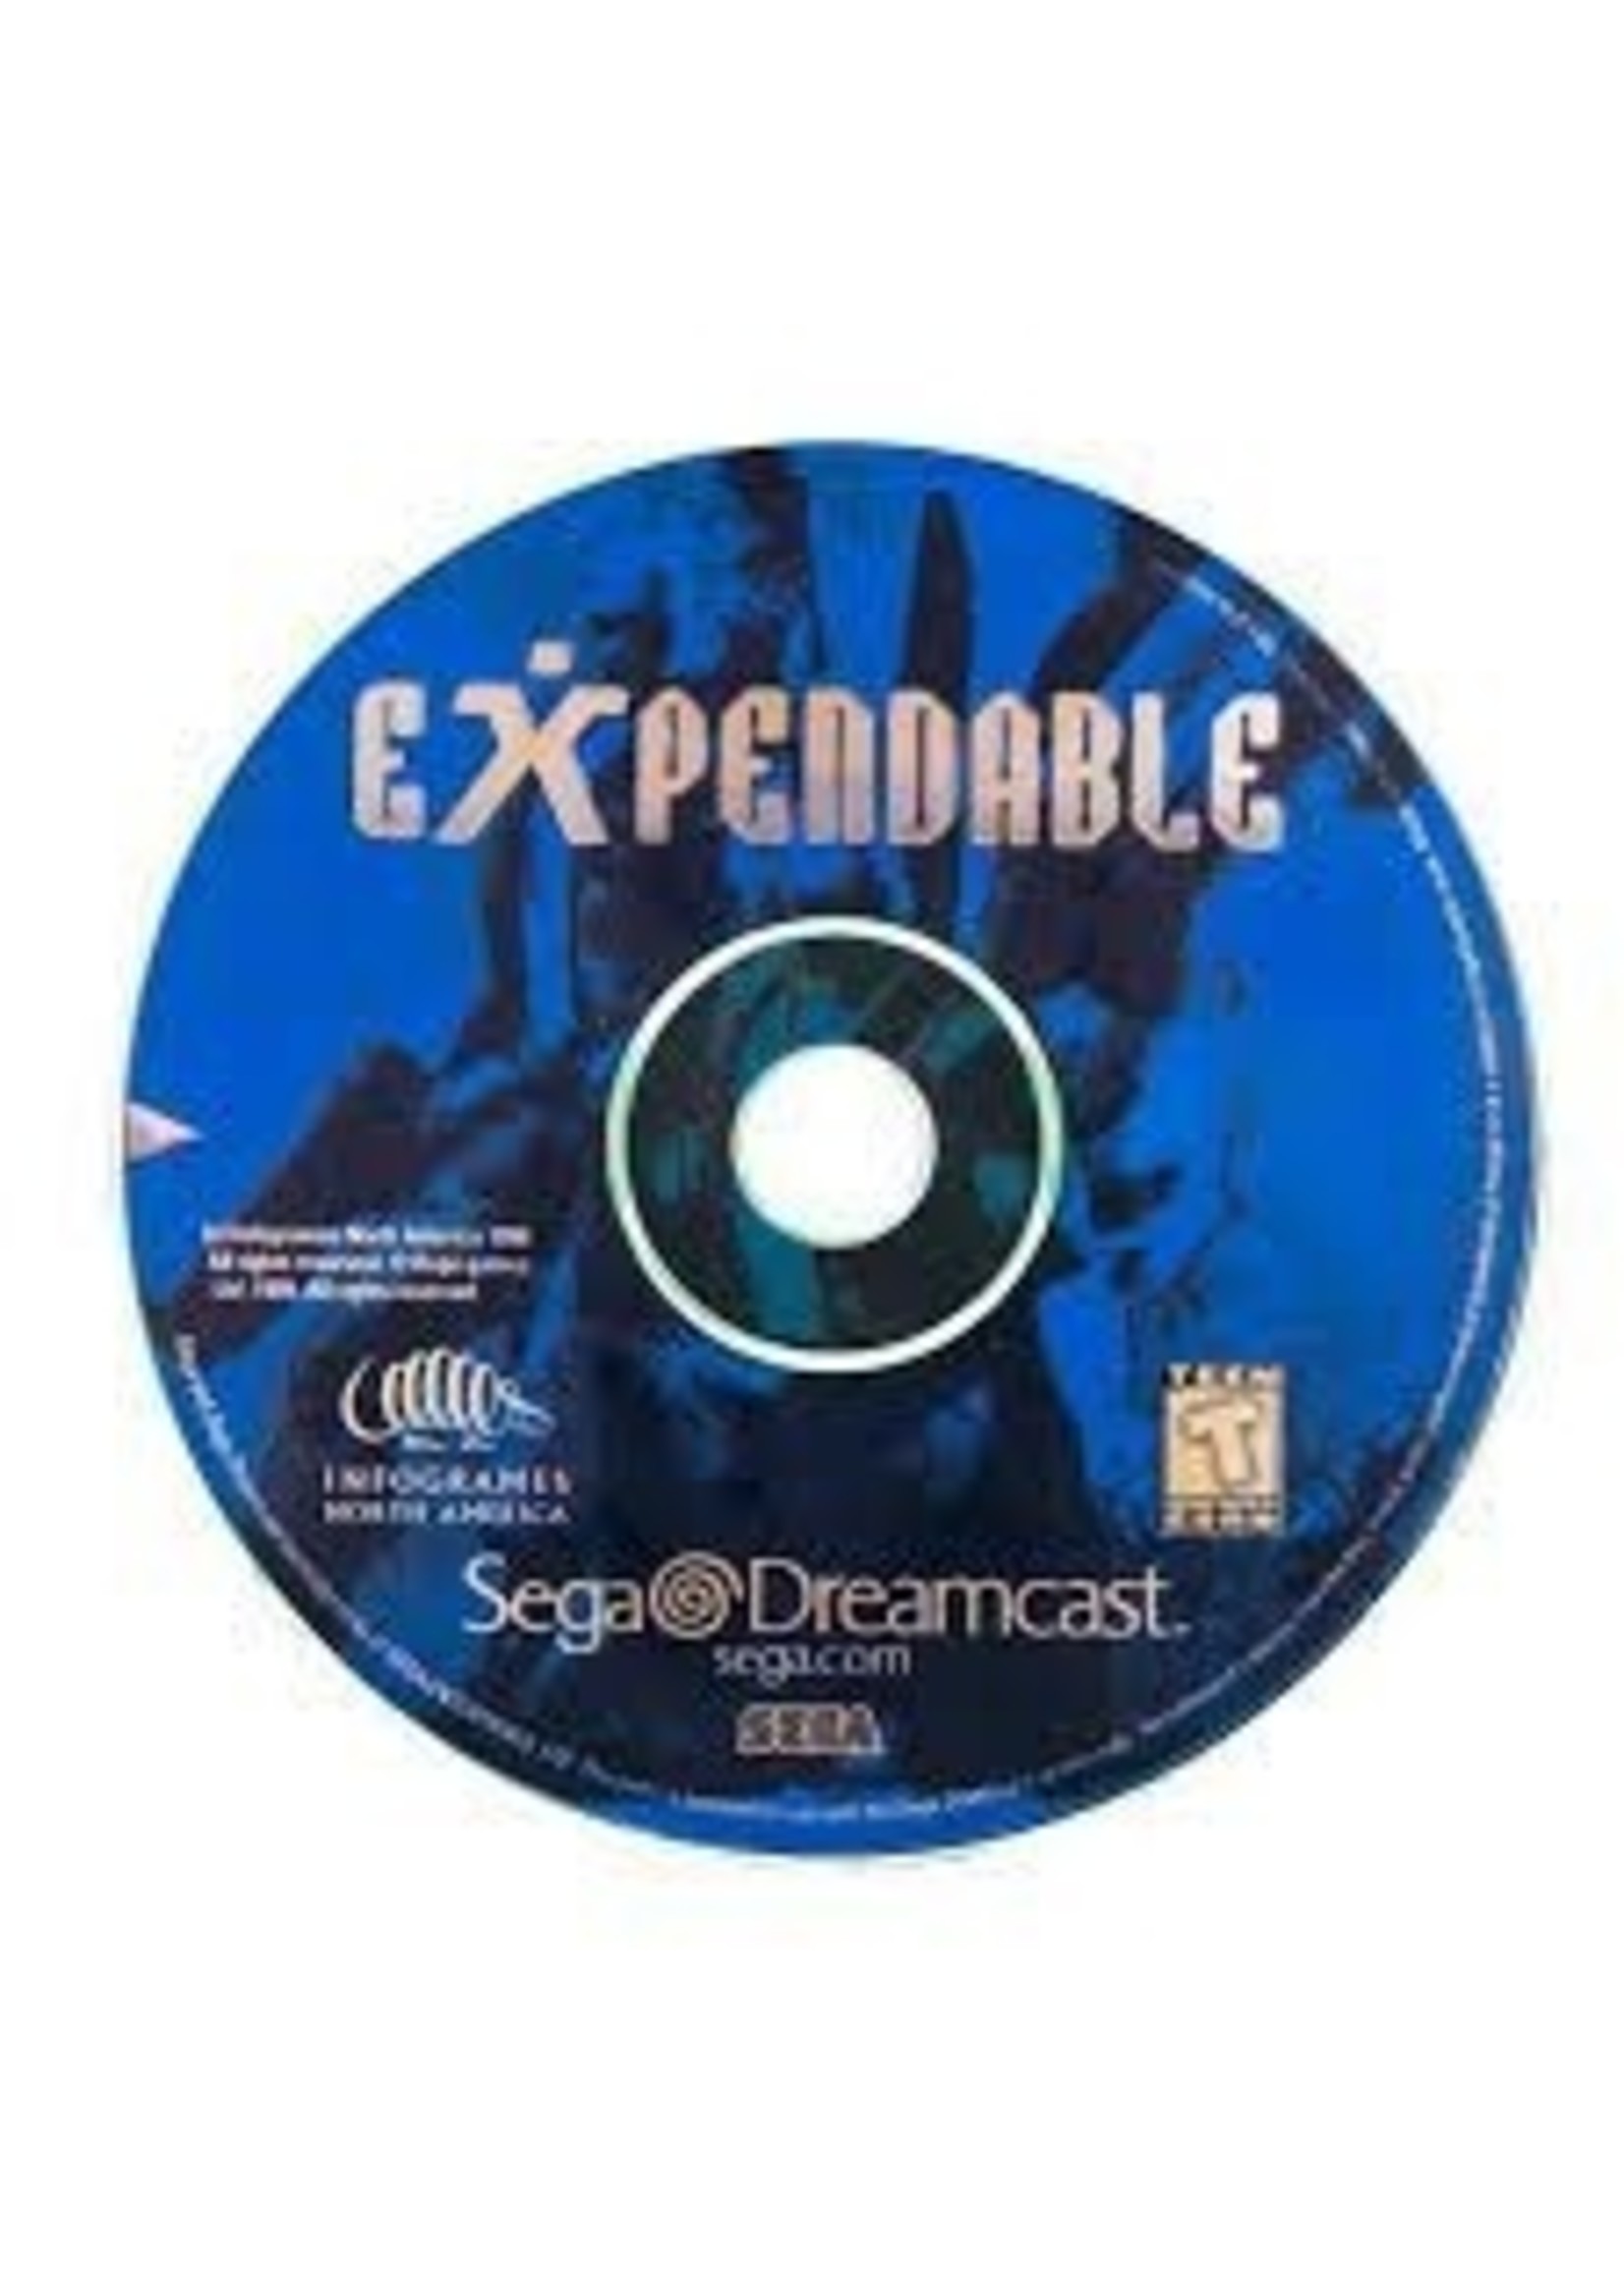 Sega Dreamcast Expendable - Disc Only